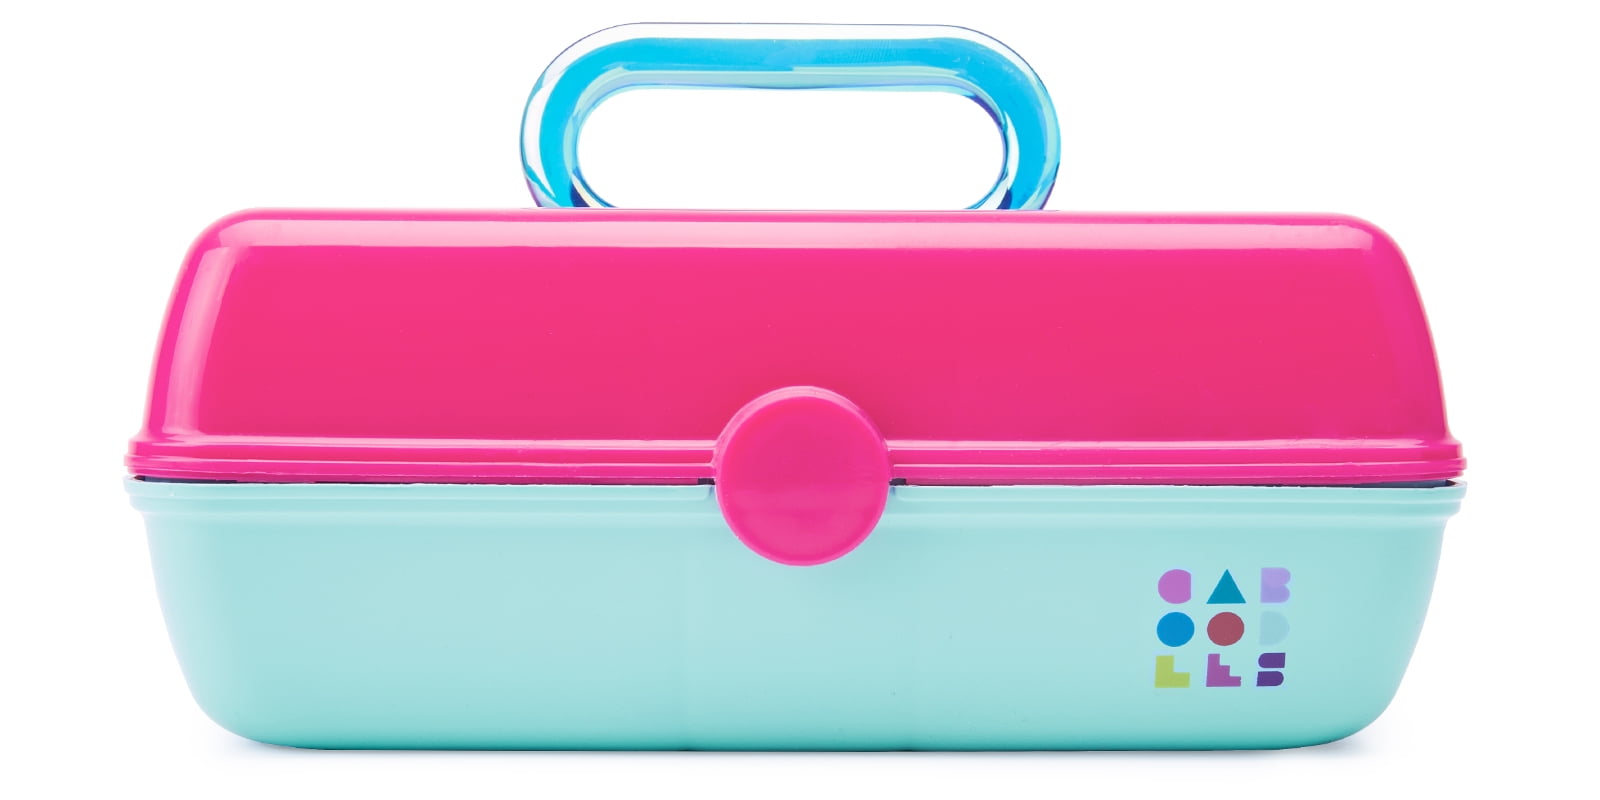 Caboodles Pretty In Petite Makeup Bag - Pink And Blue : Target